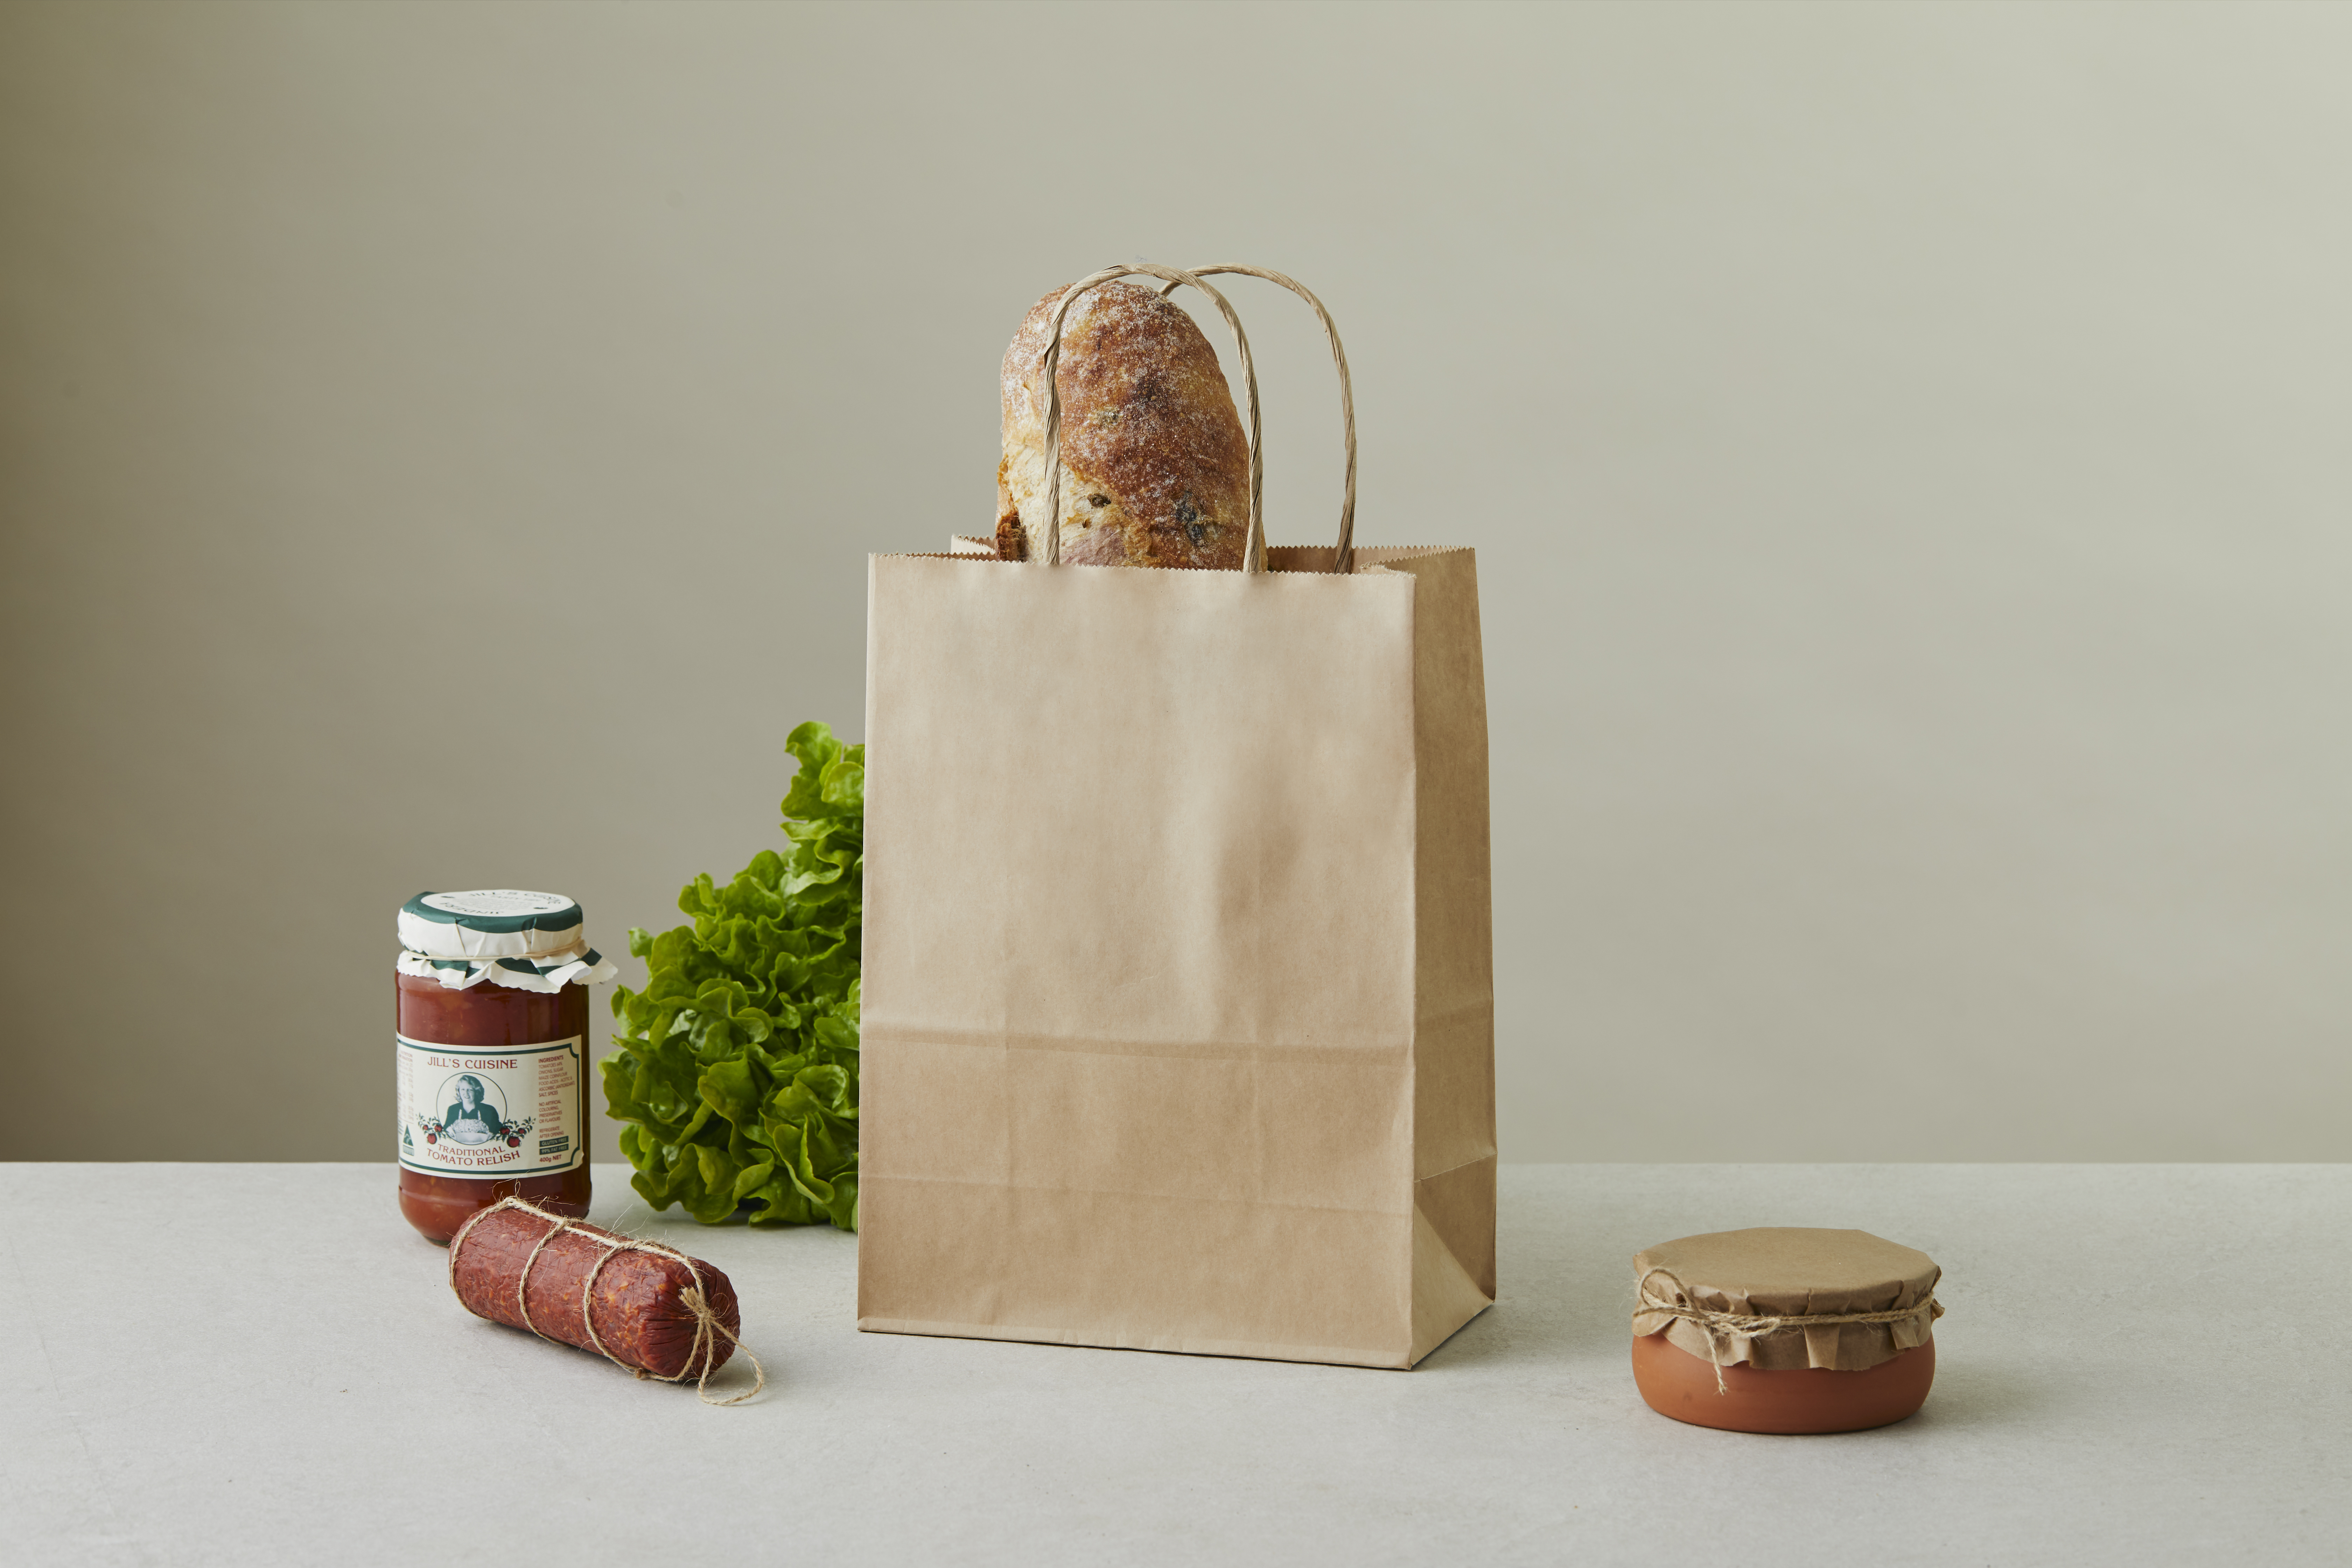 Paper bag filled with bread and fresh produce.